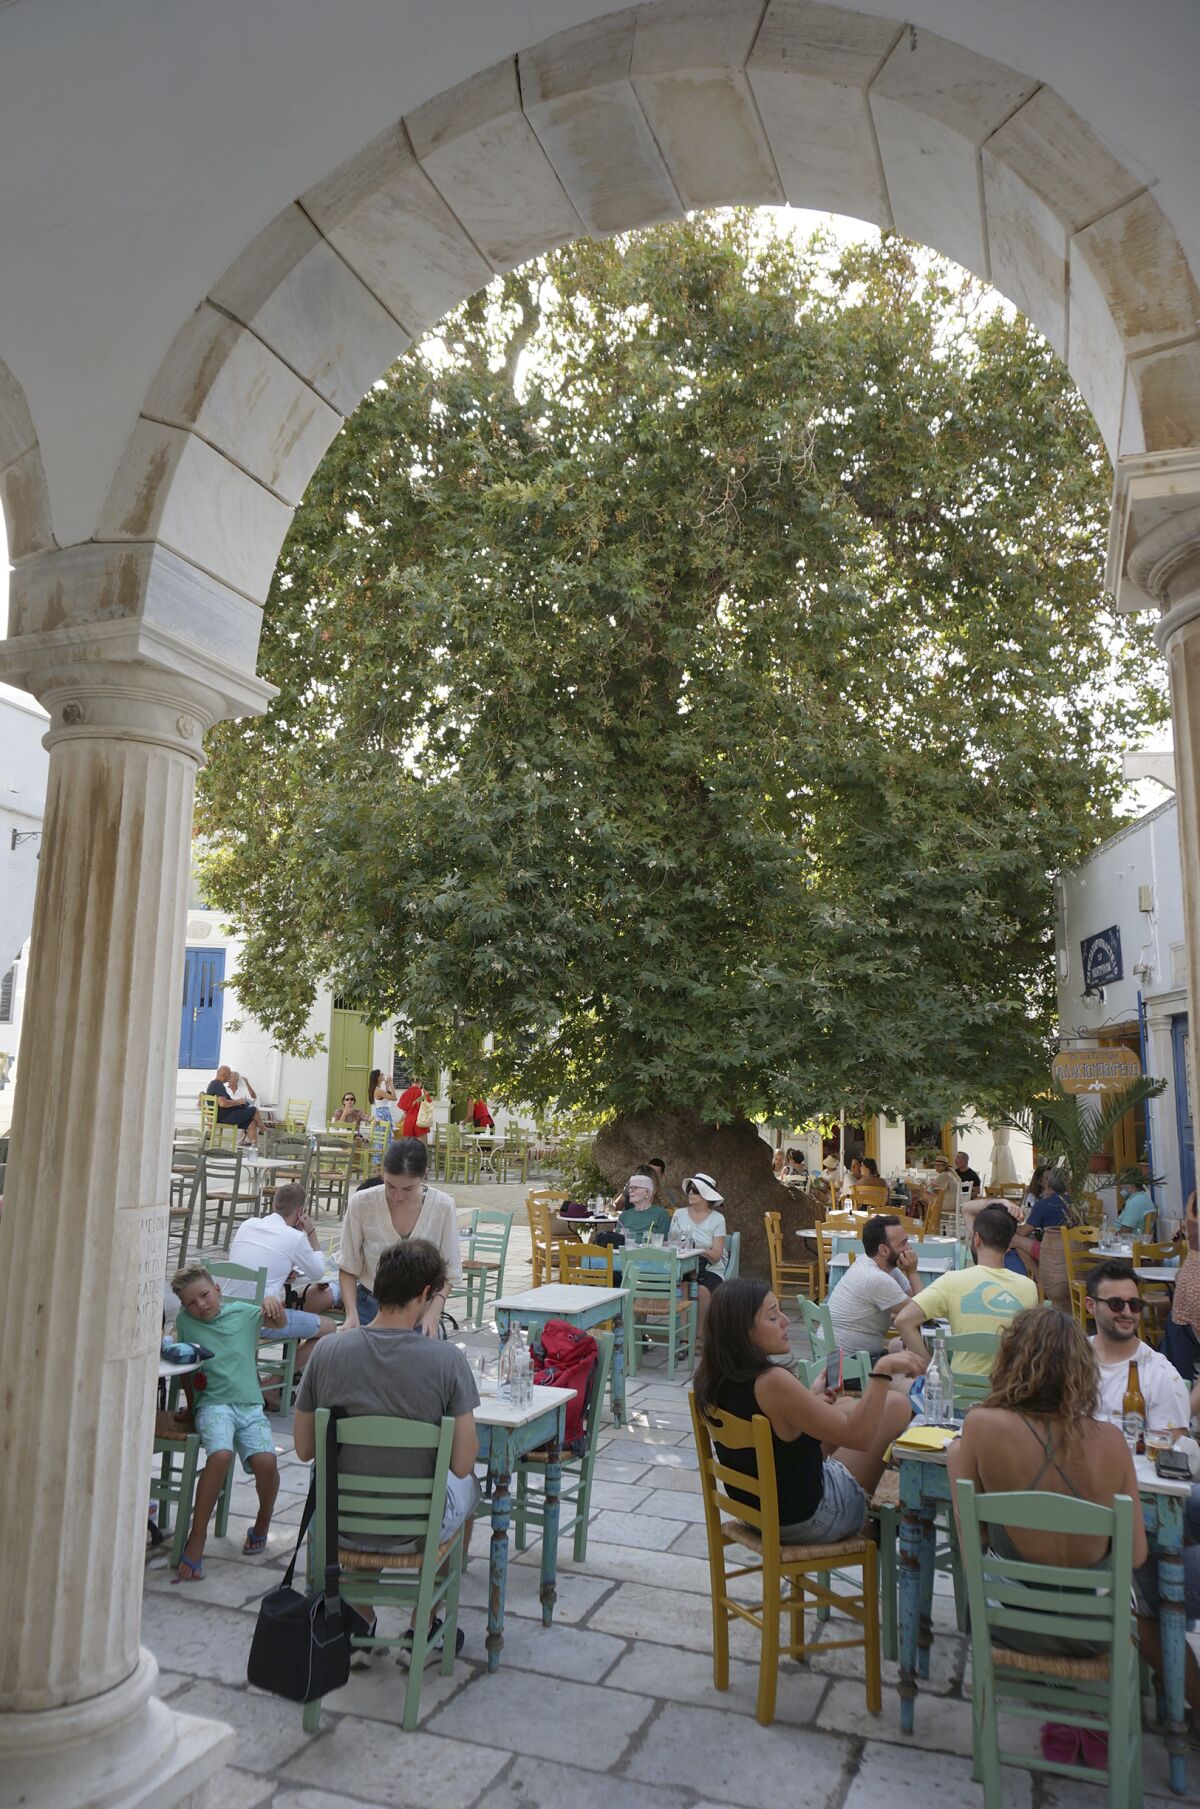 A large plane tree shades the cafe-lined central square in the village of Pyrgos on Tinos, which is paved with marble.